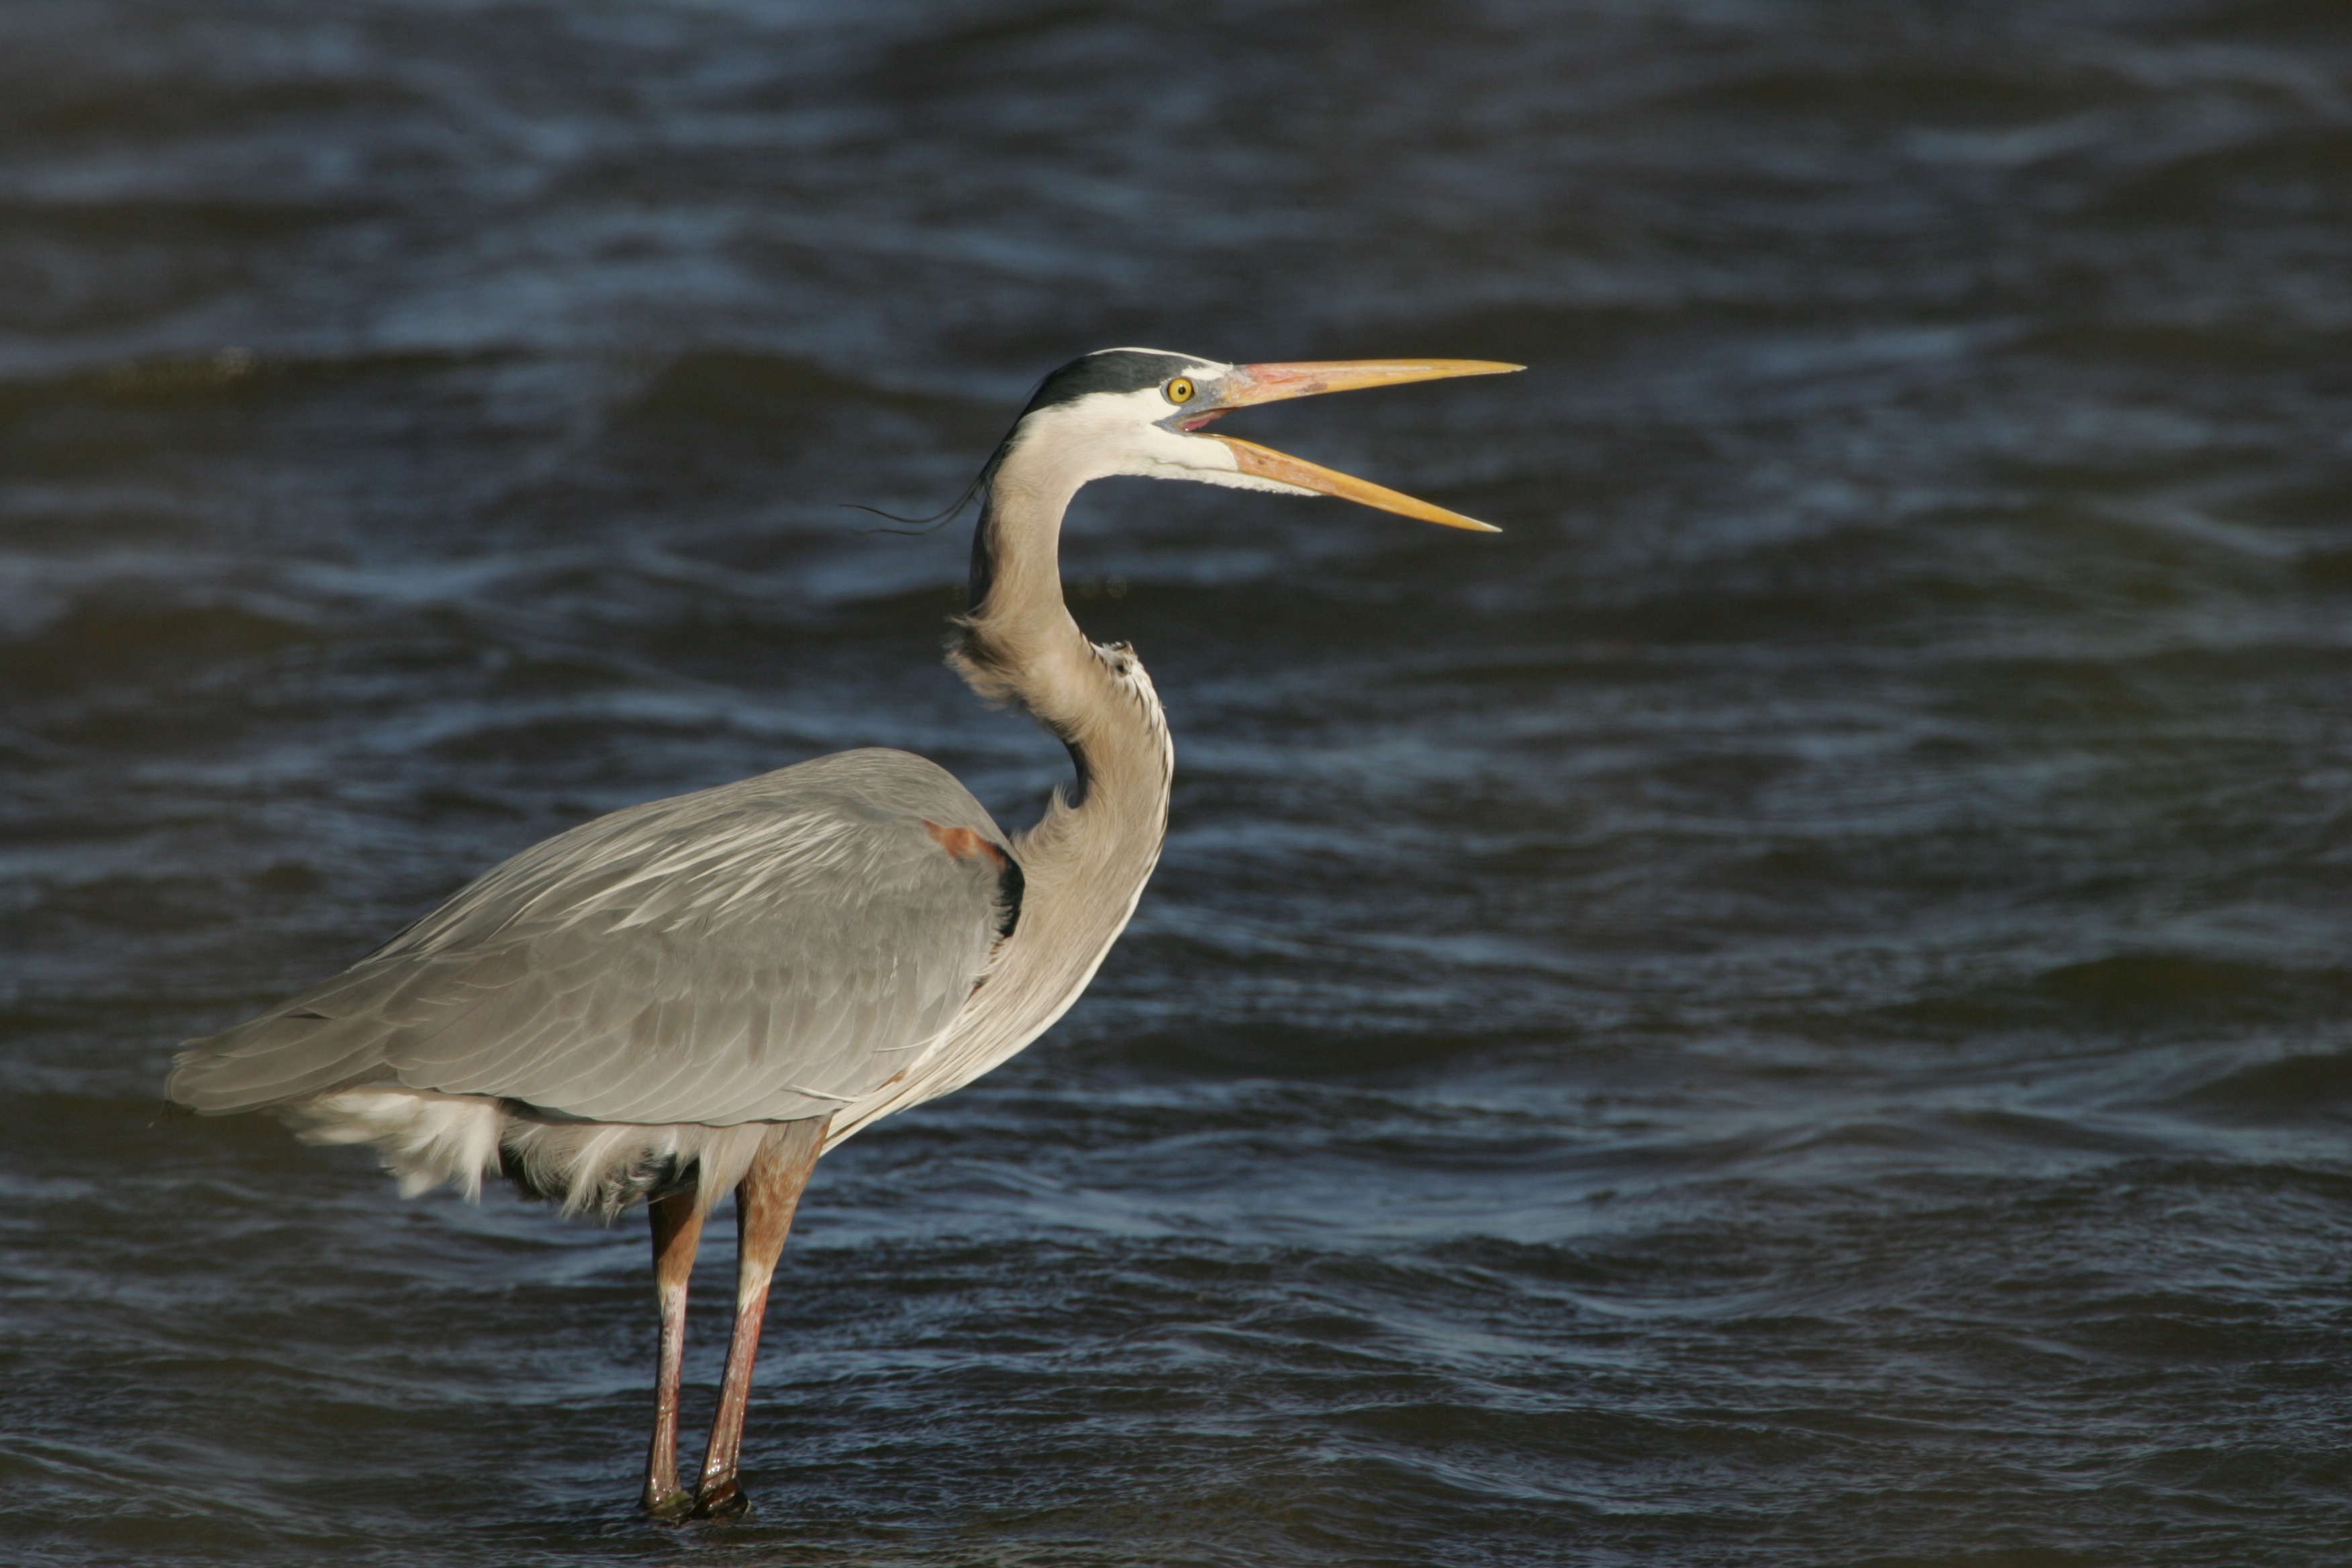 Blue heron in the river photo